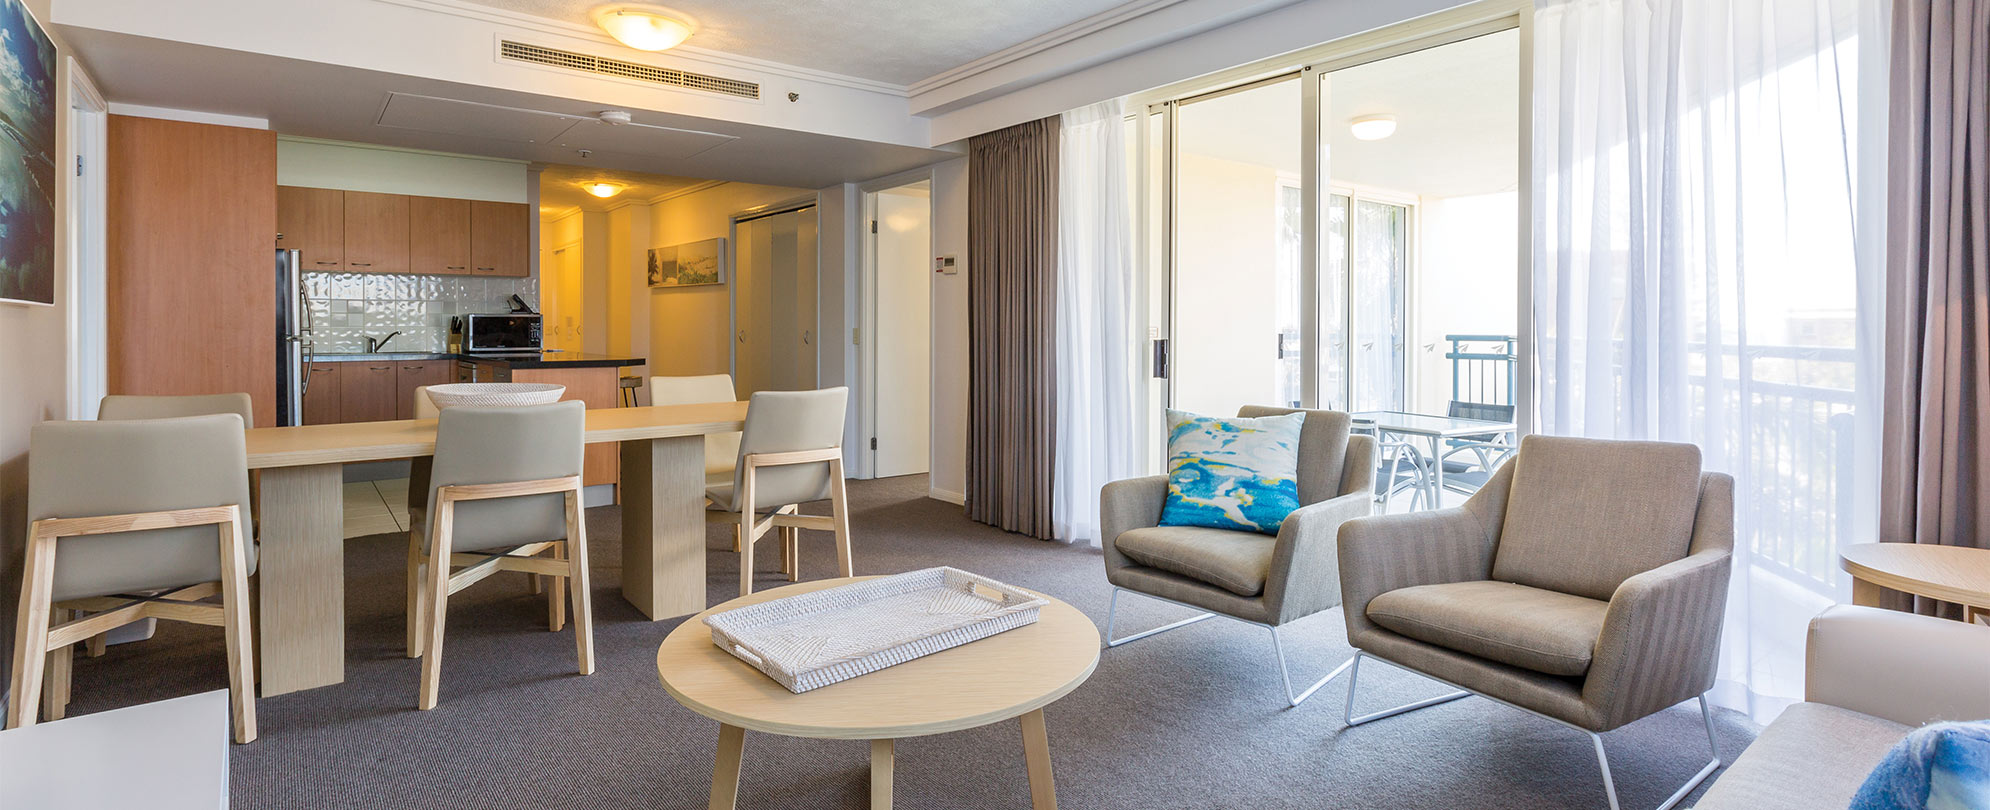 The living and dining area of a Club Wyndham Kirra Beach standard suite with a dining table, coffee table, and chairs.